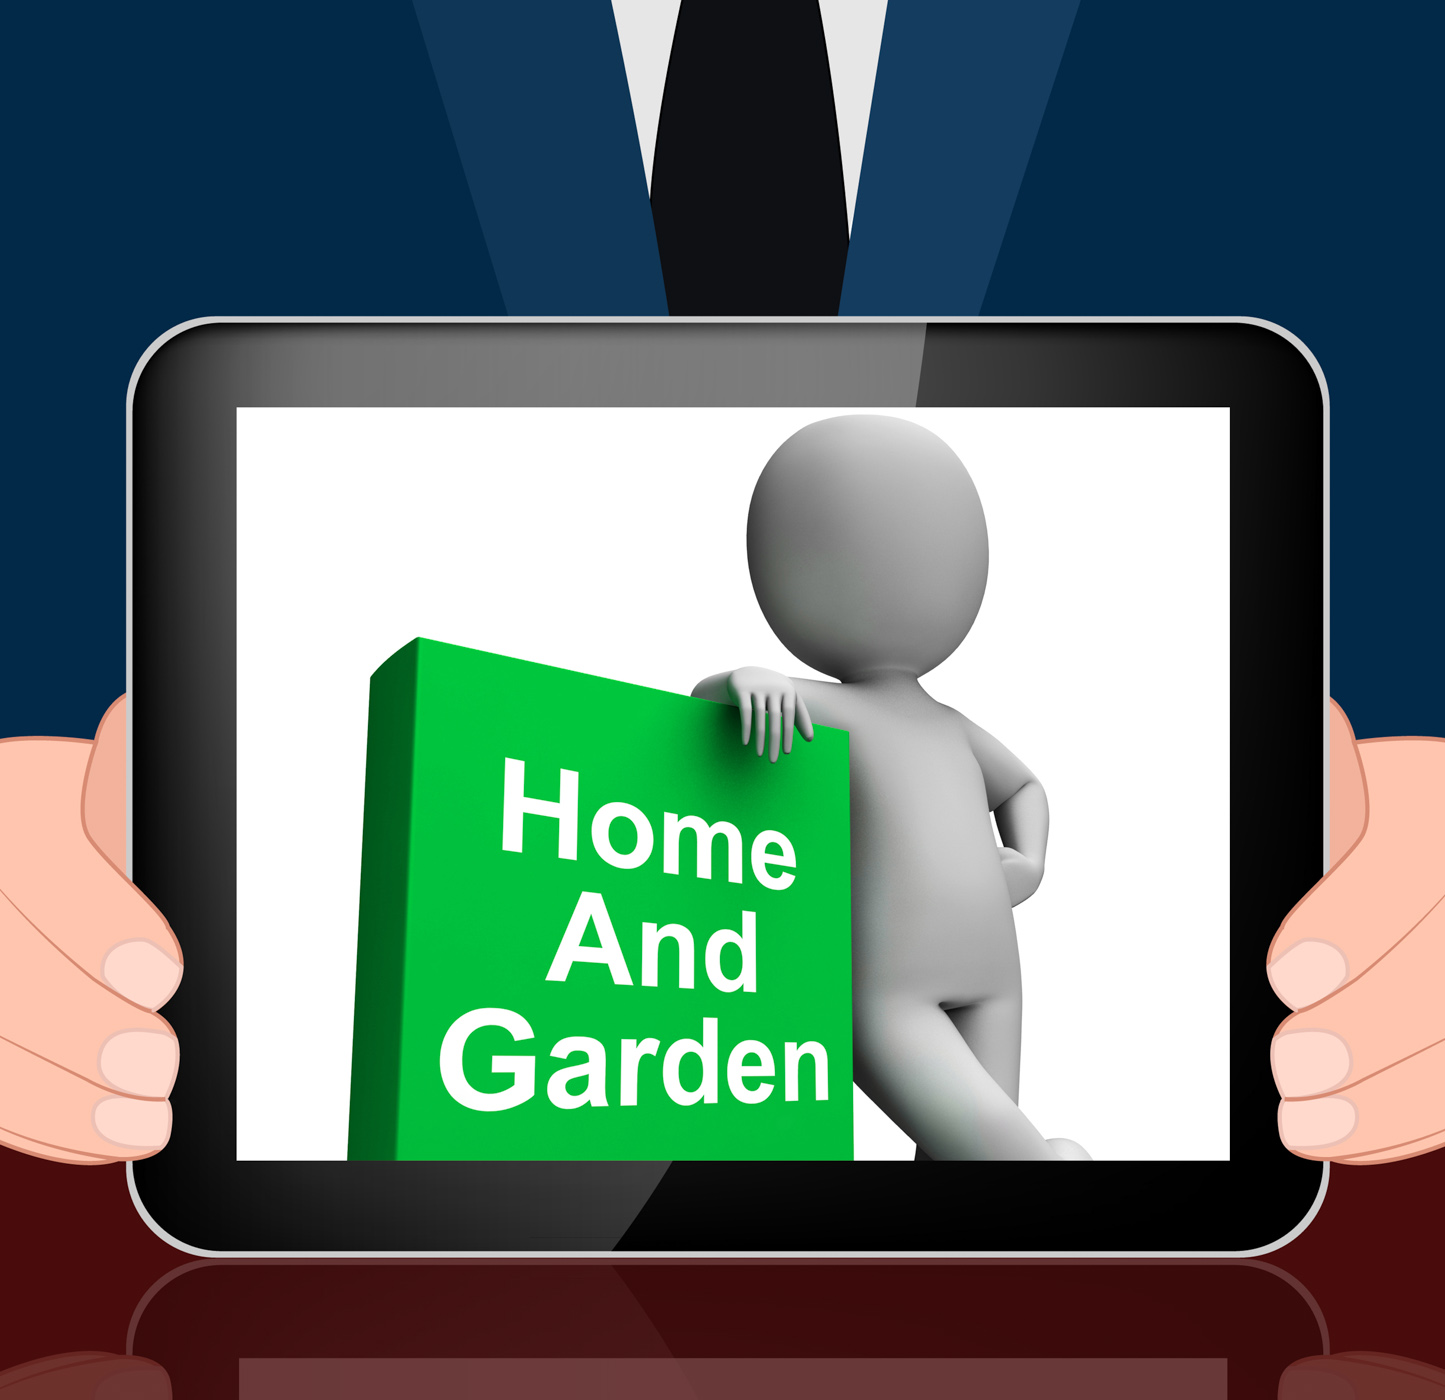 Home and garden book with character displays household and gardening photo